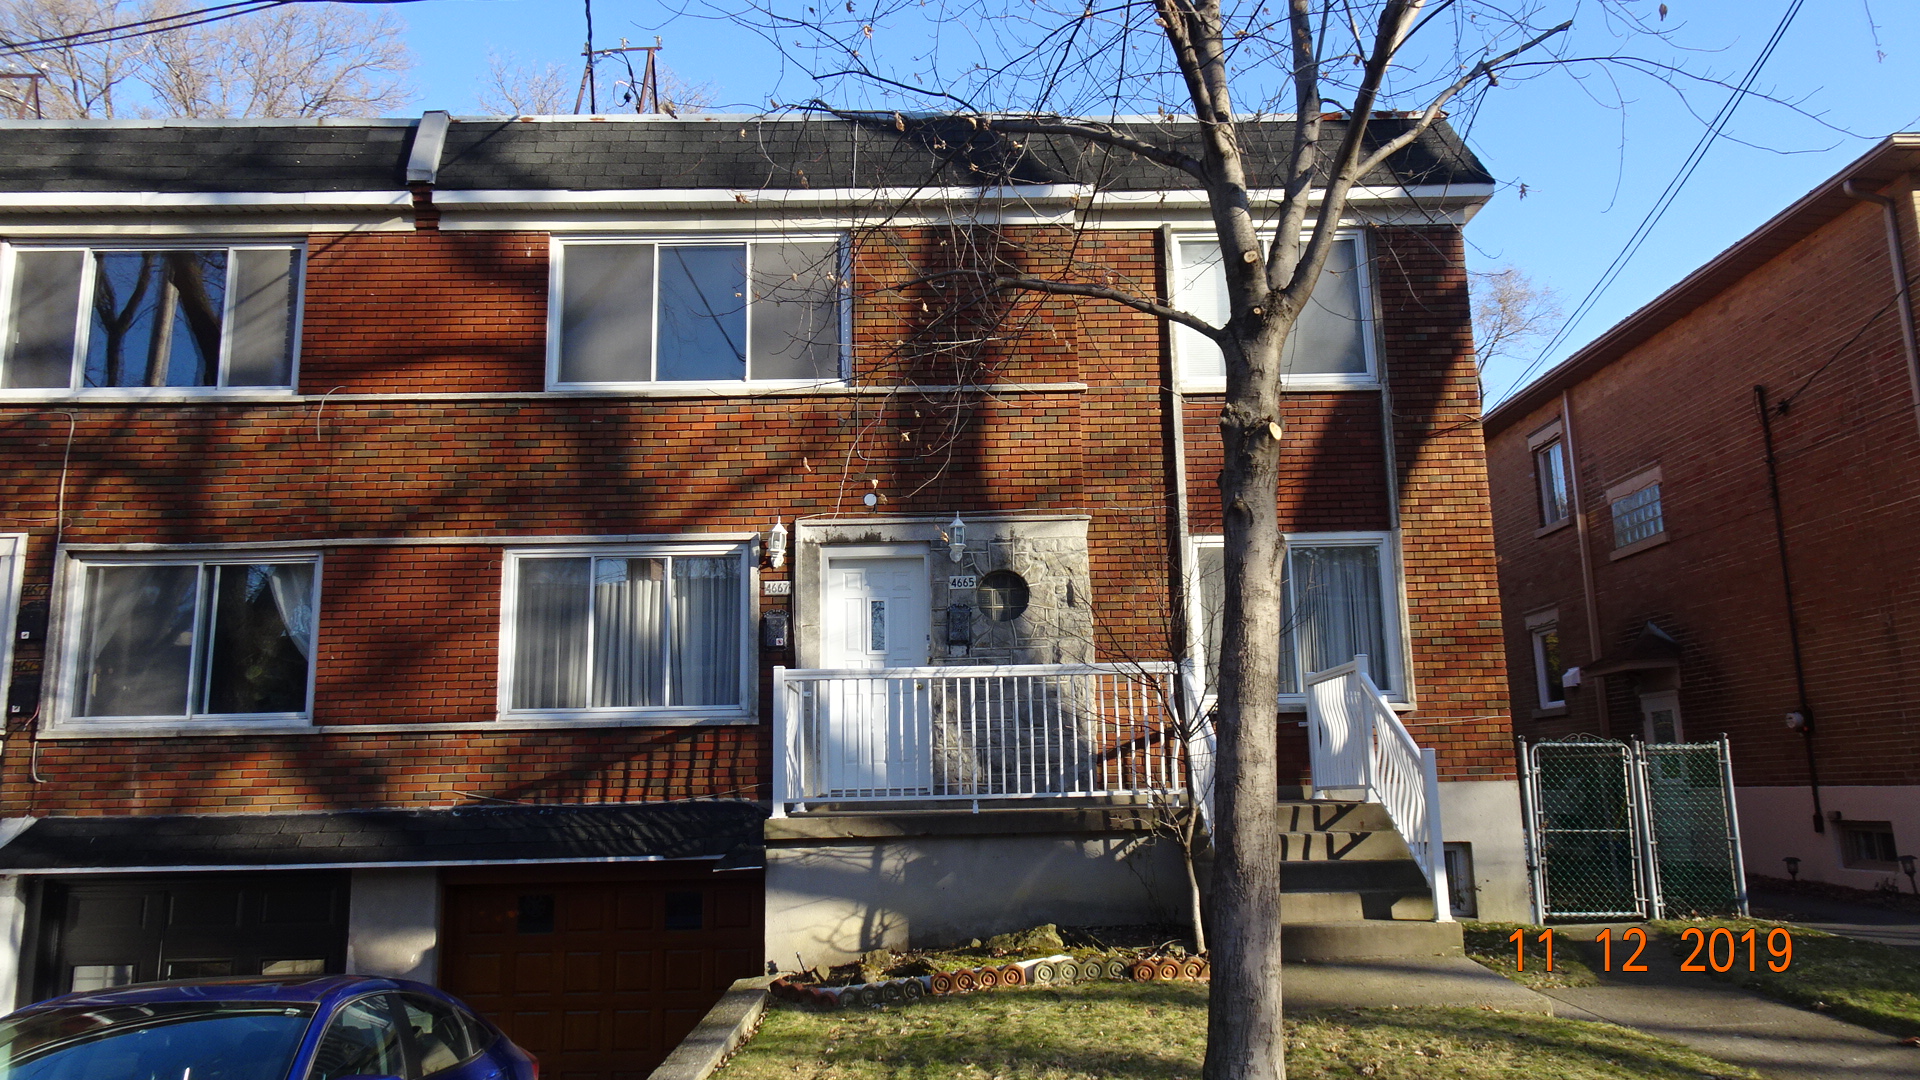 Home inspection report:4665-4667 Av. Beaconsfield, Montreal, QC H4A 2H5 